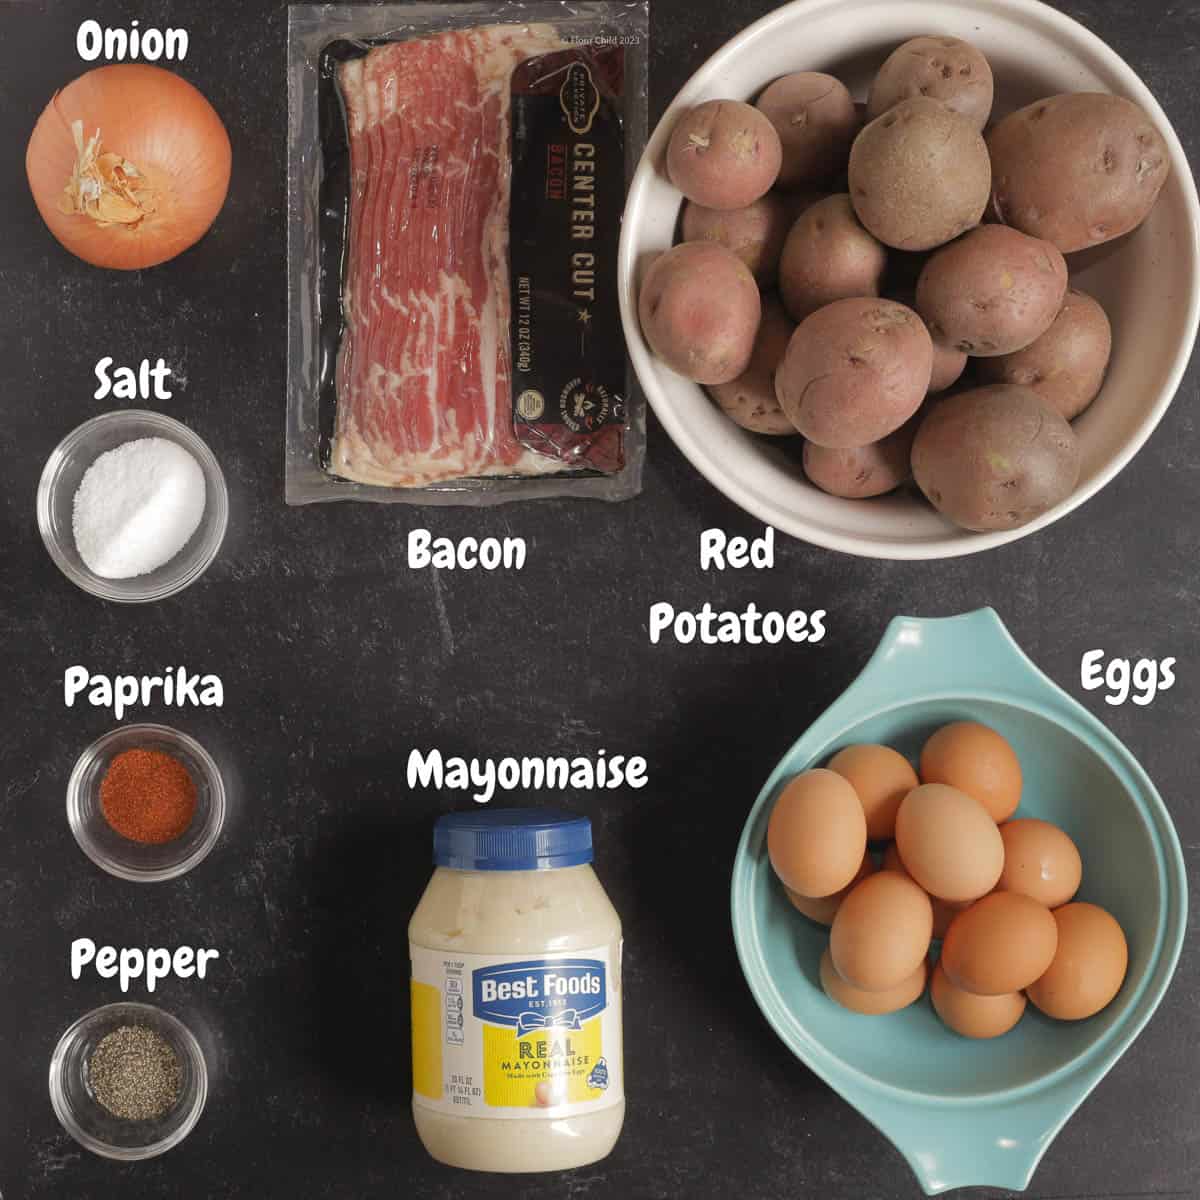 All of the ingredients for the classic potato salad recipe on a black background.